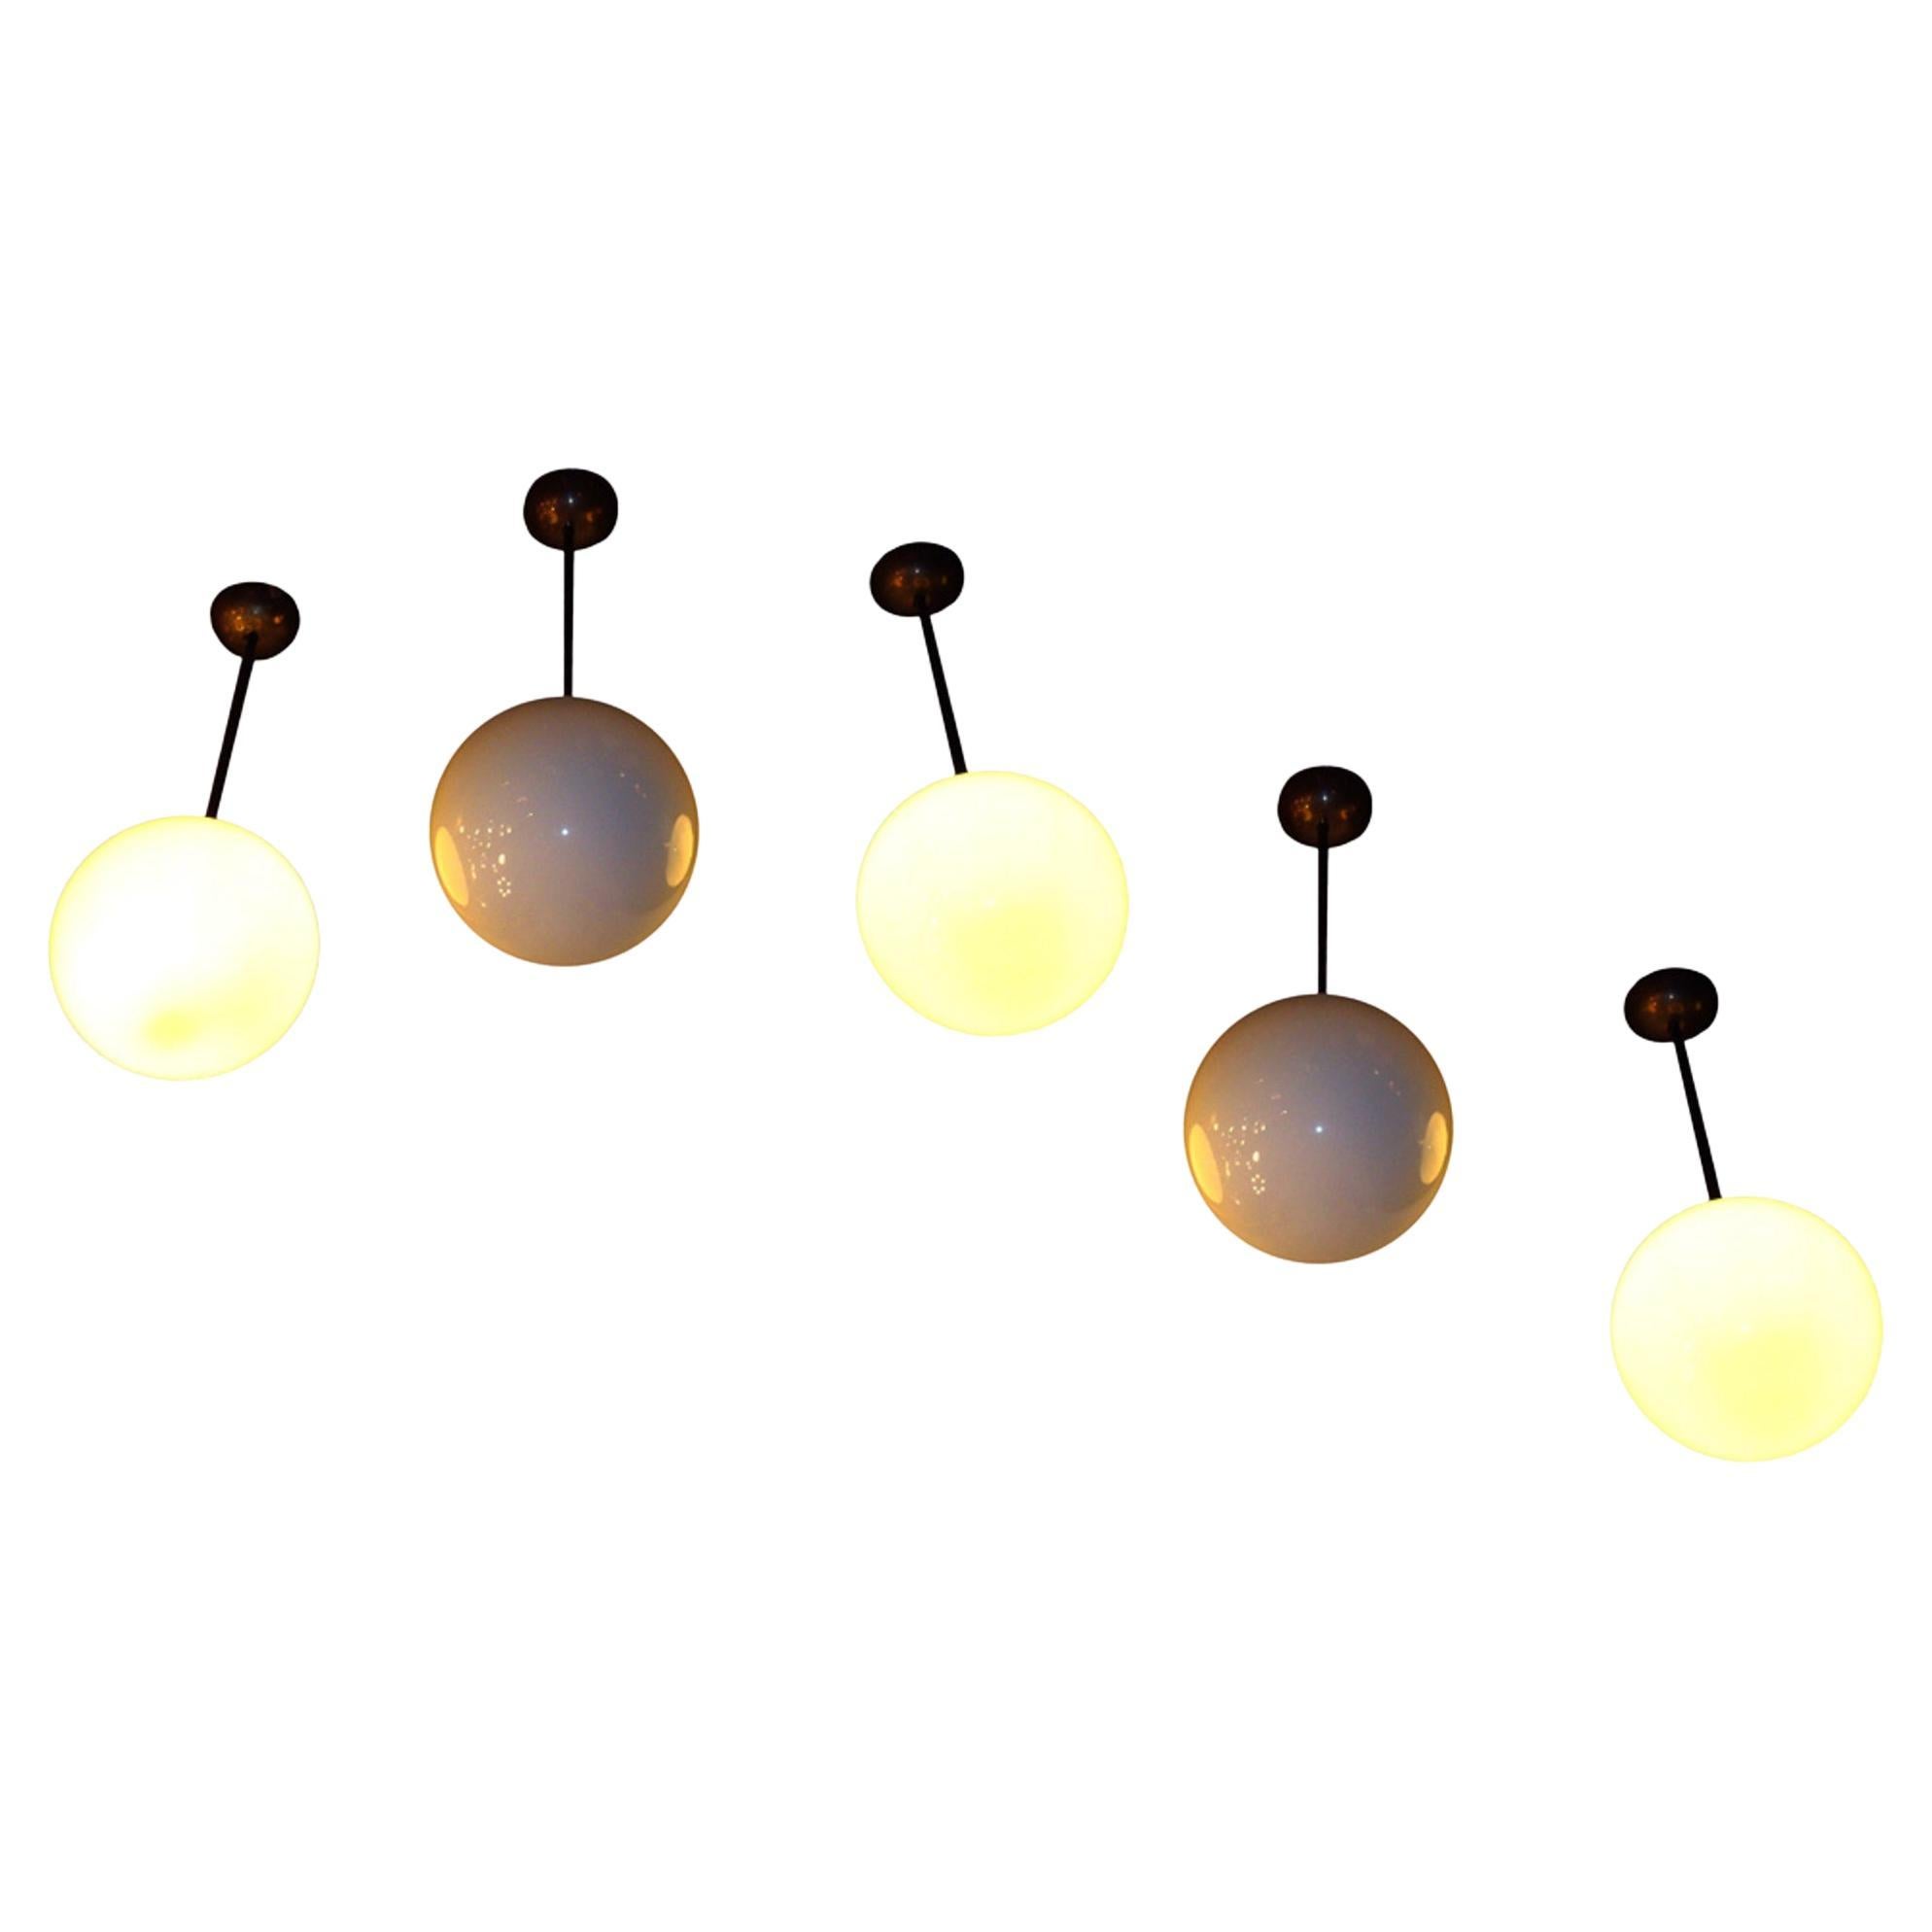 5 Ball Lamps of the Kavanagh Building in Buenos Aires, Argentina, 1920, Bauhaus